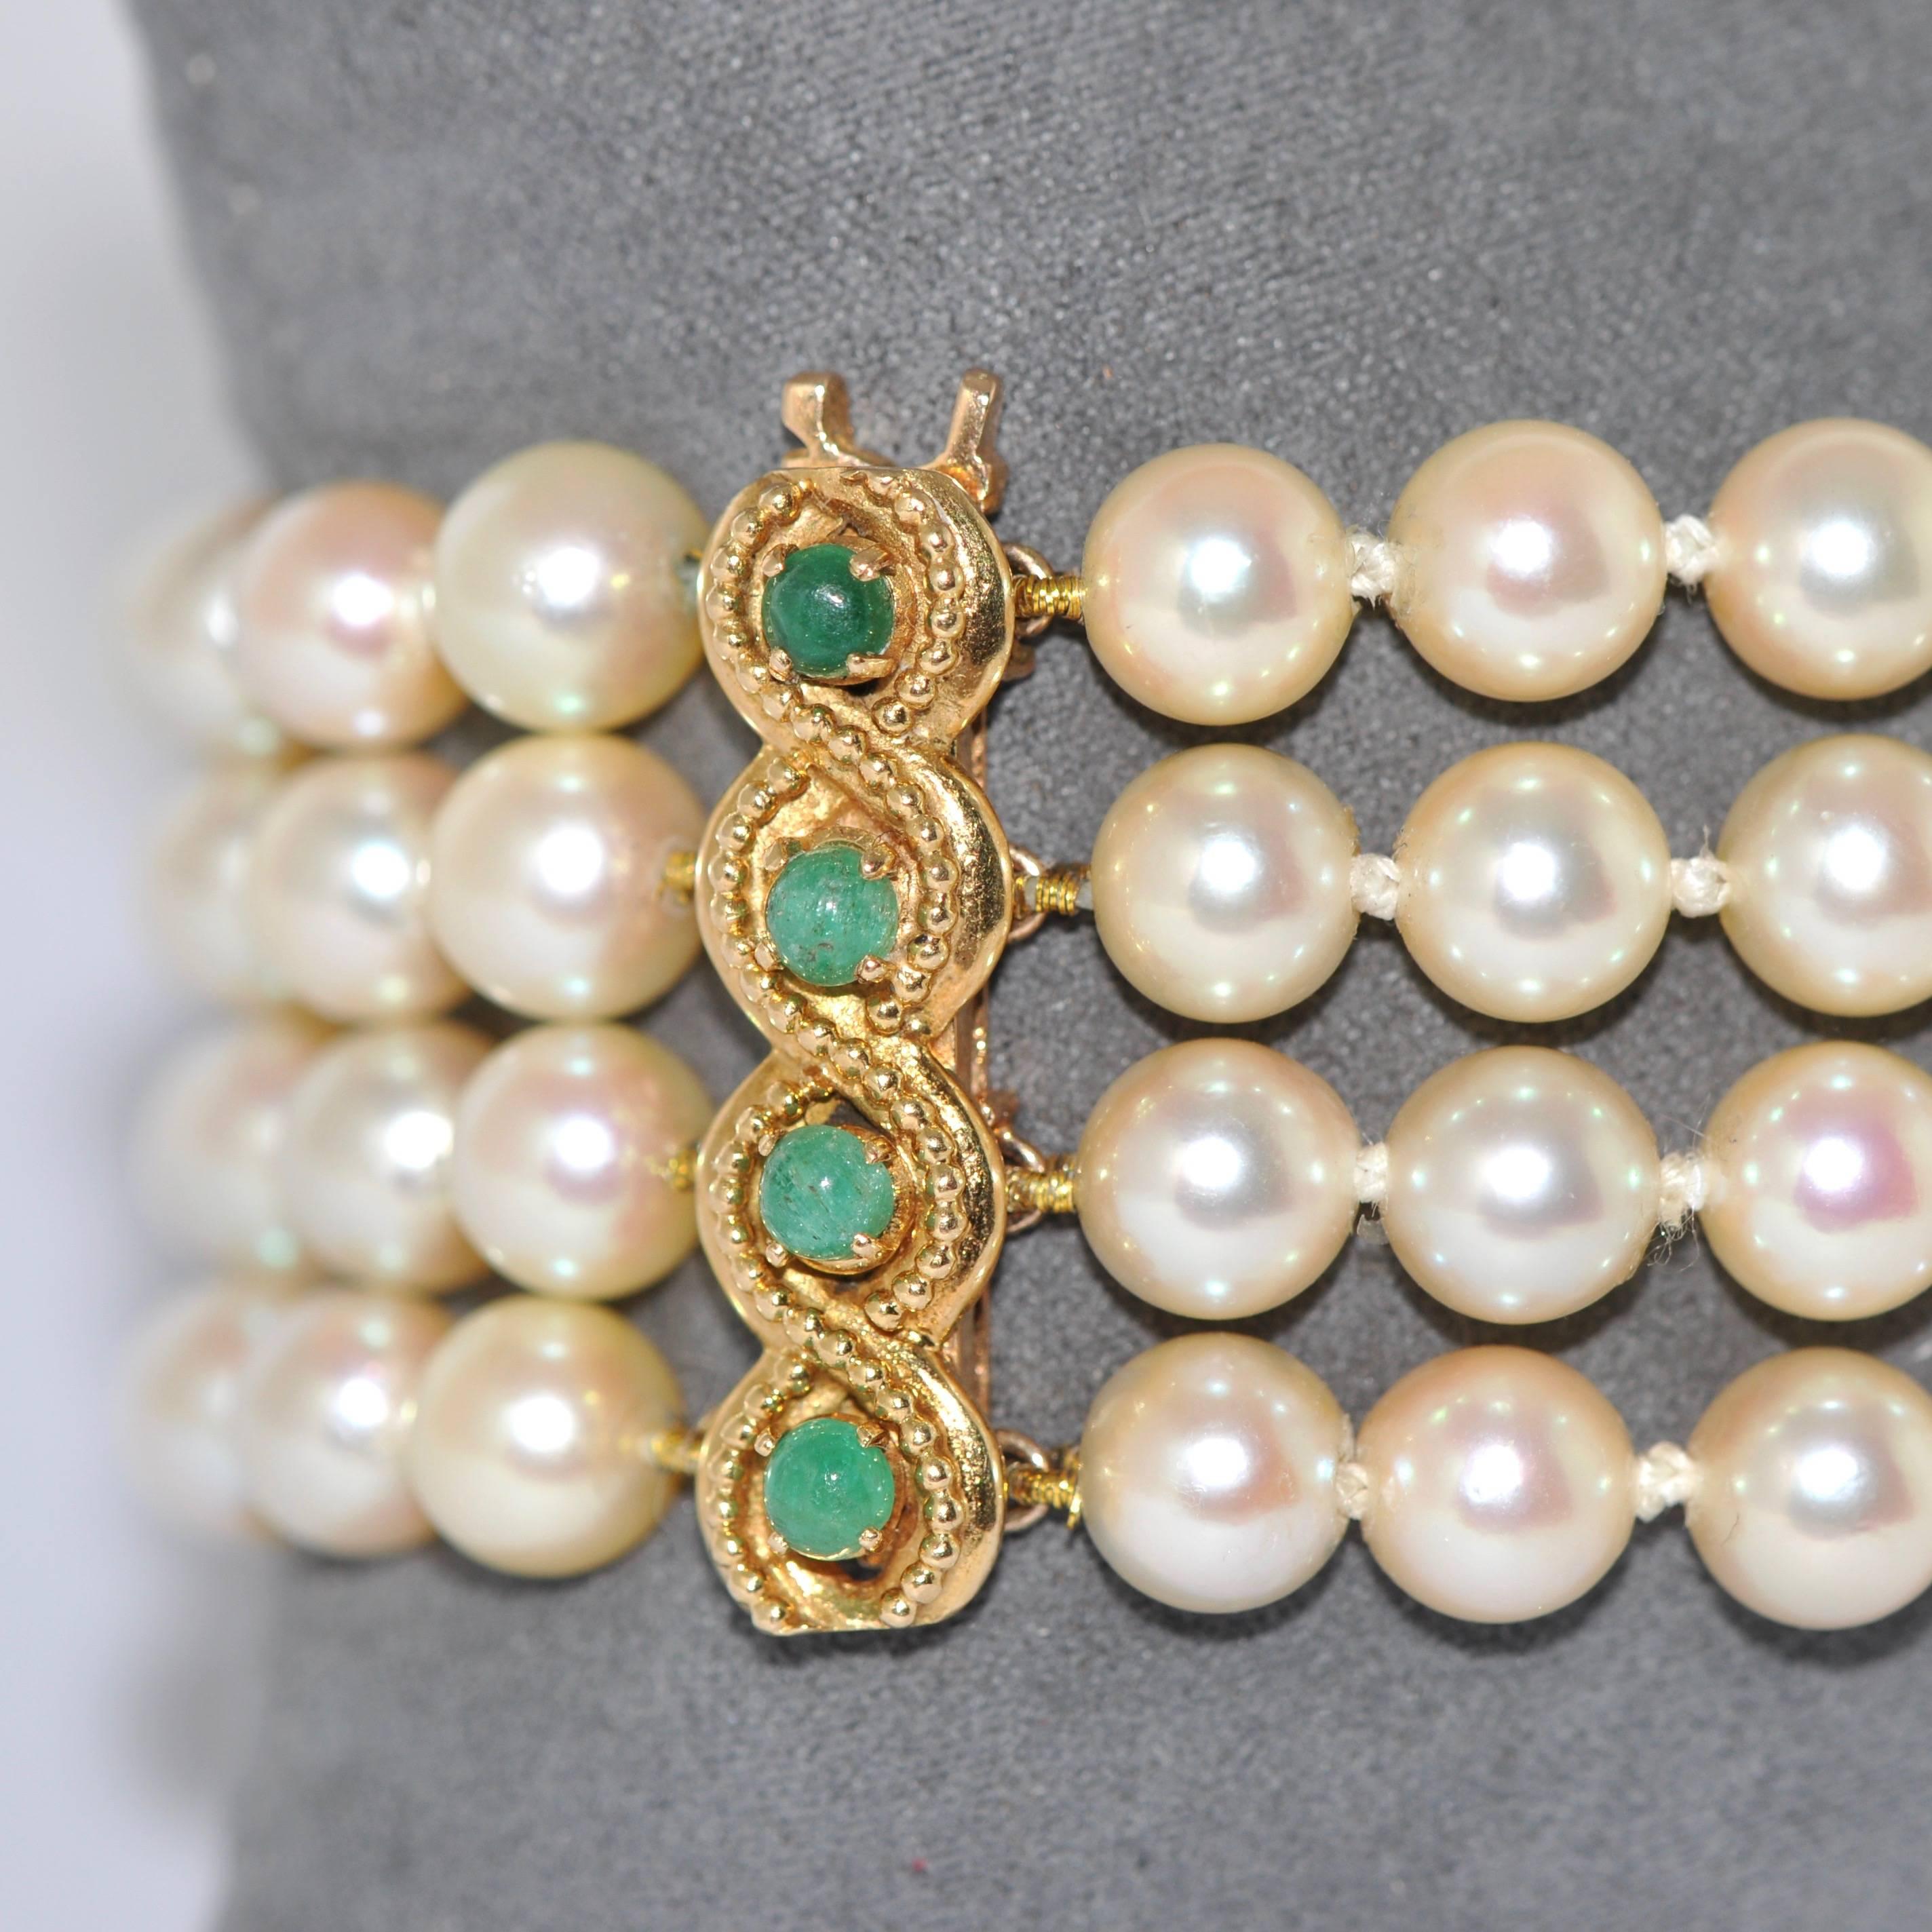 Discover this Pearls and Emeralds Yellow Gold Beaded Bracelet.
8 Emeralds
New Thread 
100 Pearls 6.5 mm Triple A 4 Raws
Clasp and Stones Support Yellow Gold 18 Carat
Strong Clasp
20 cm